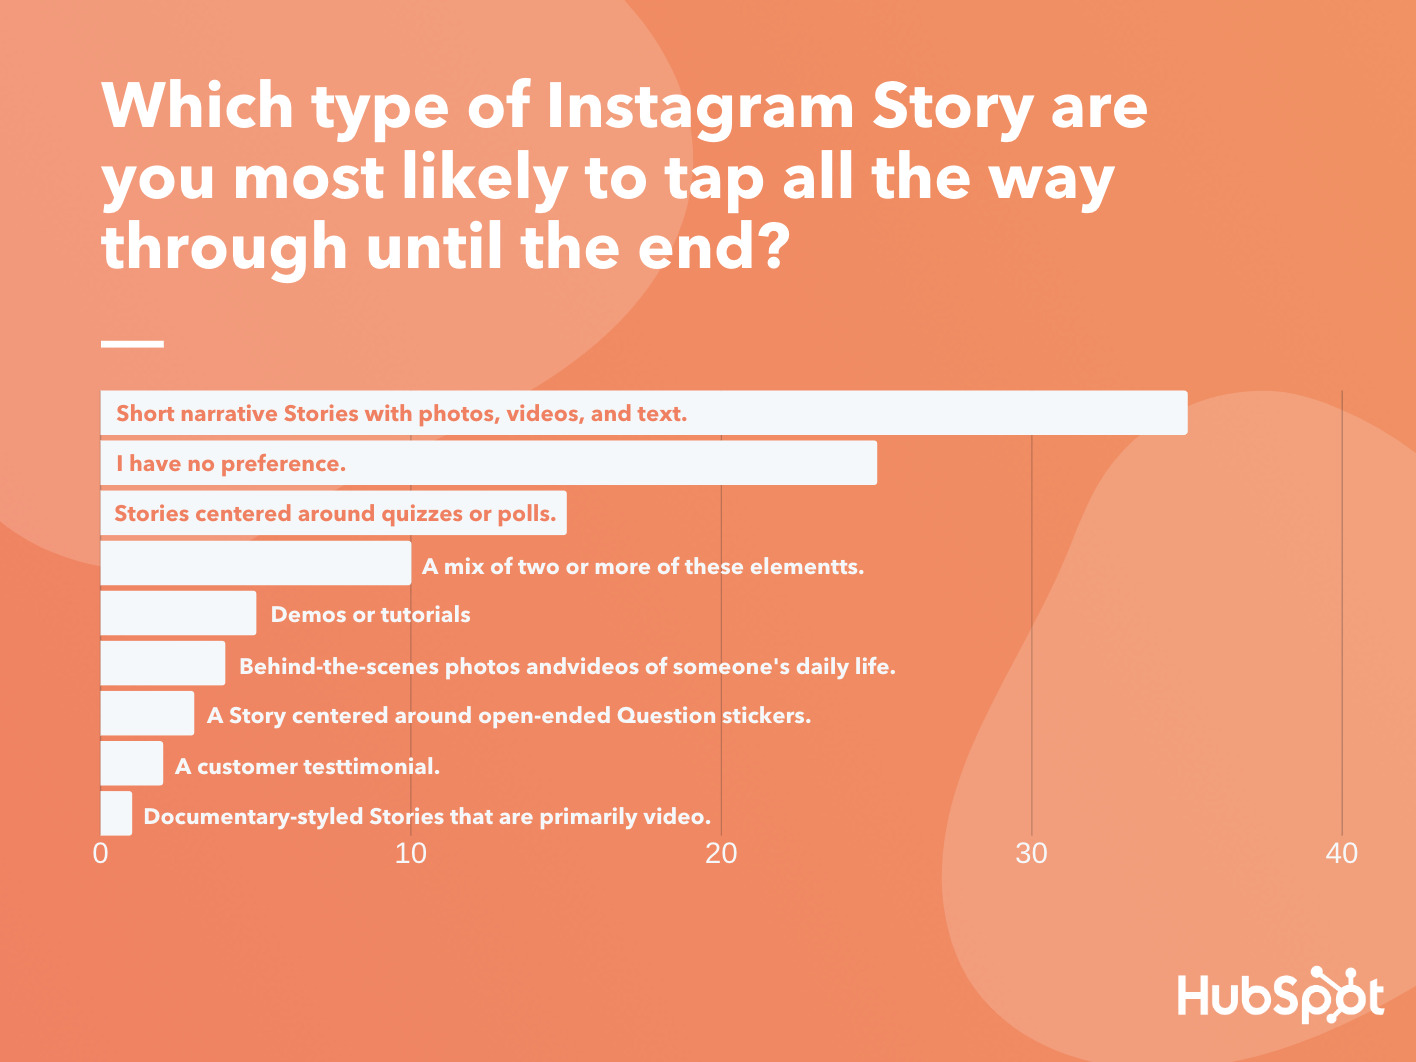 Visual content marketing statistics: A graph that ranks the types of Instagram Story users are most likely to tap all the way through until the end.